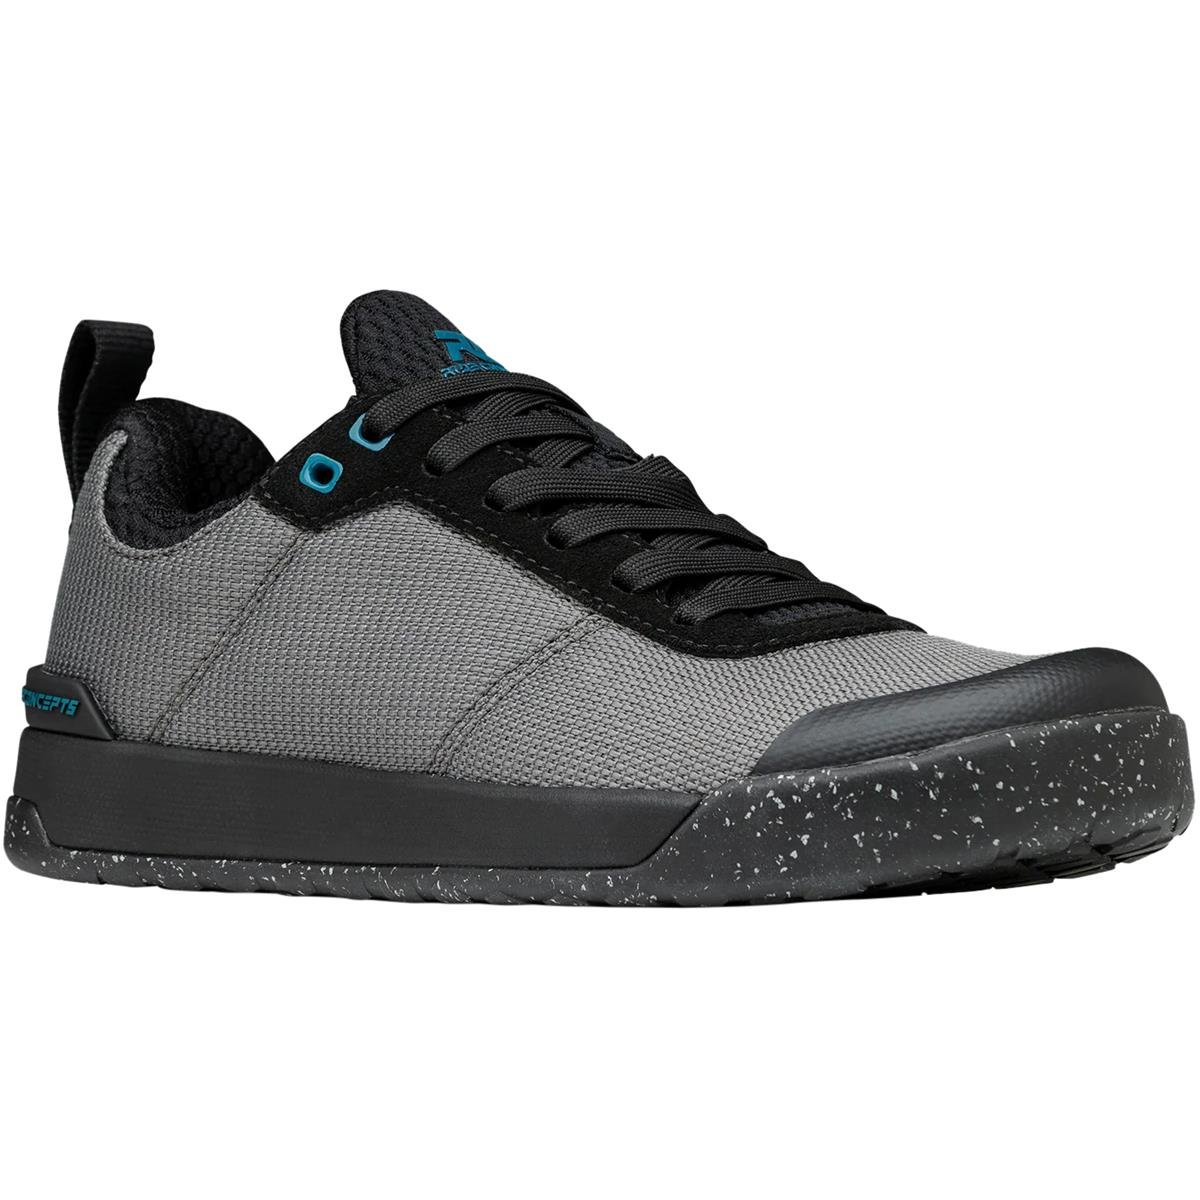 Ride Concepts Femme Chaussures VTT Accomplice Flat Charcoal/Tahoe Blue